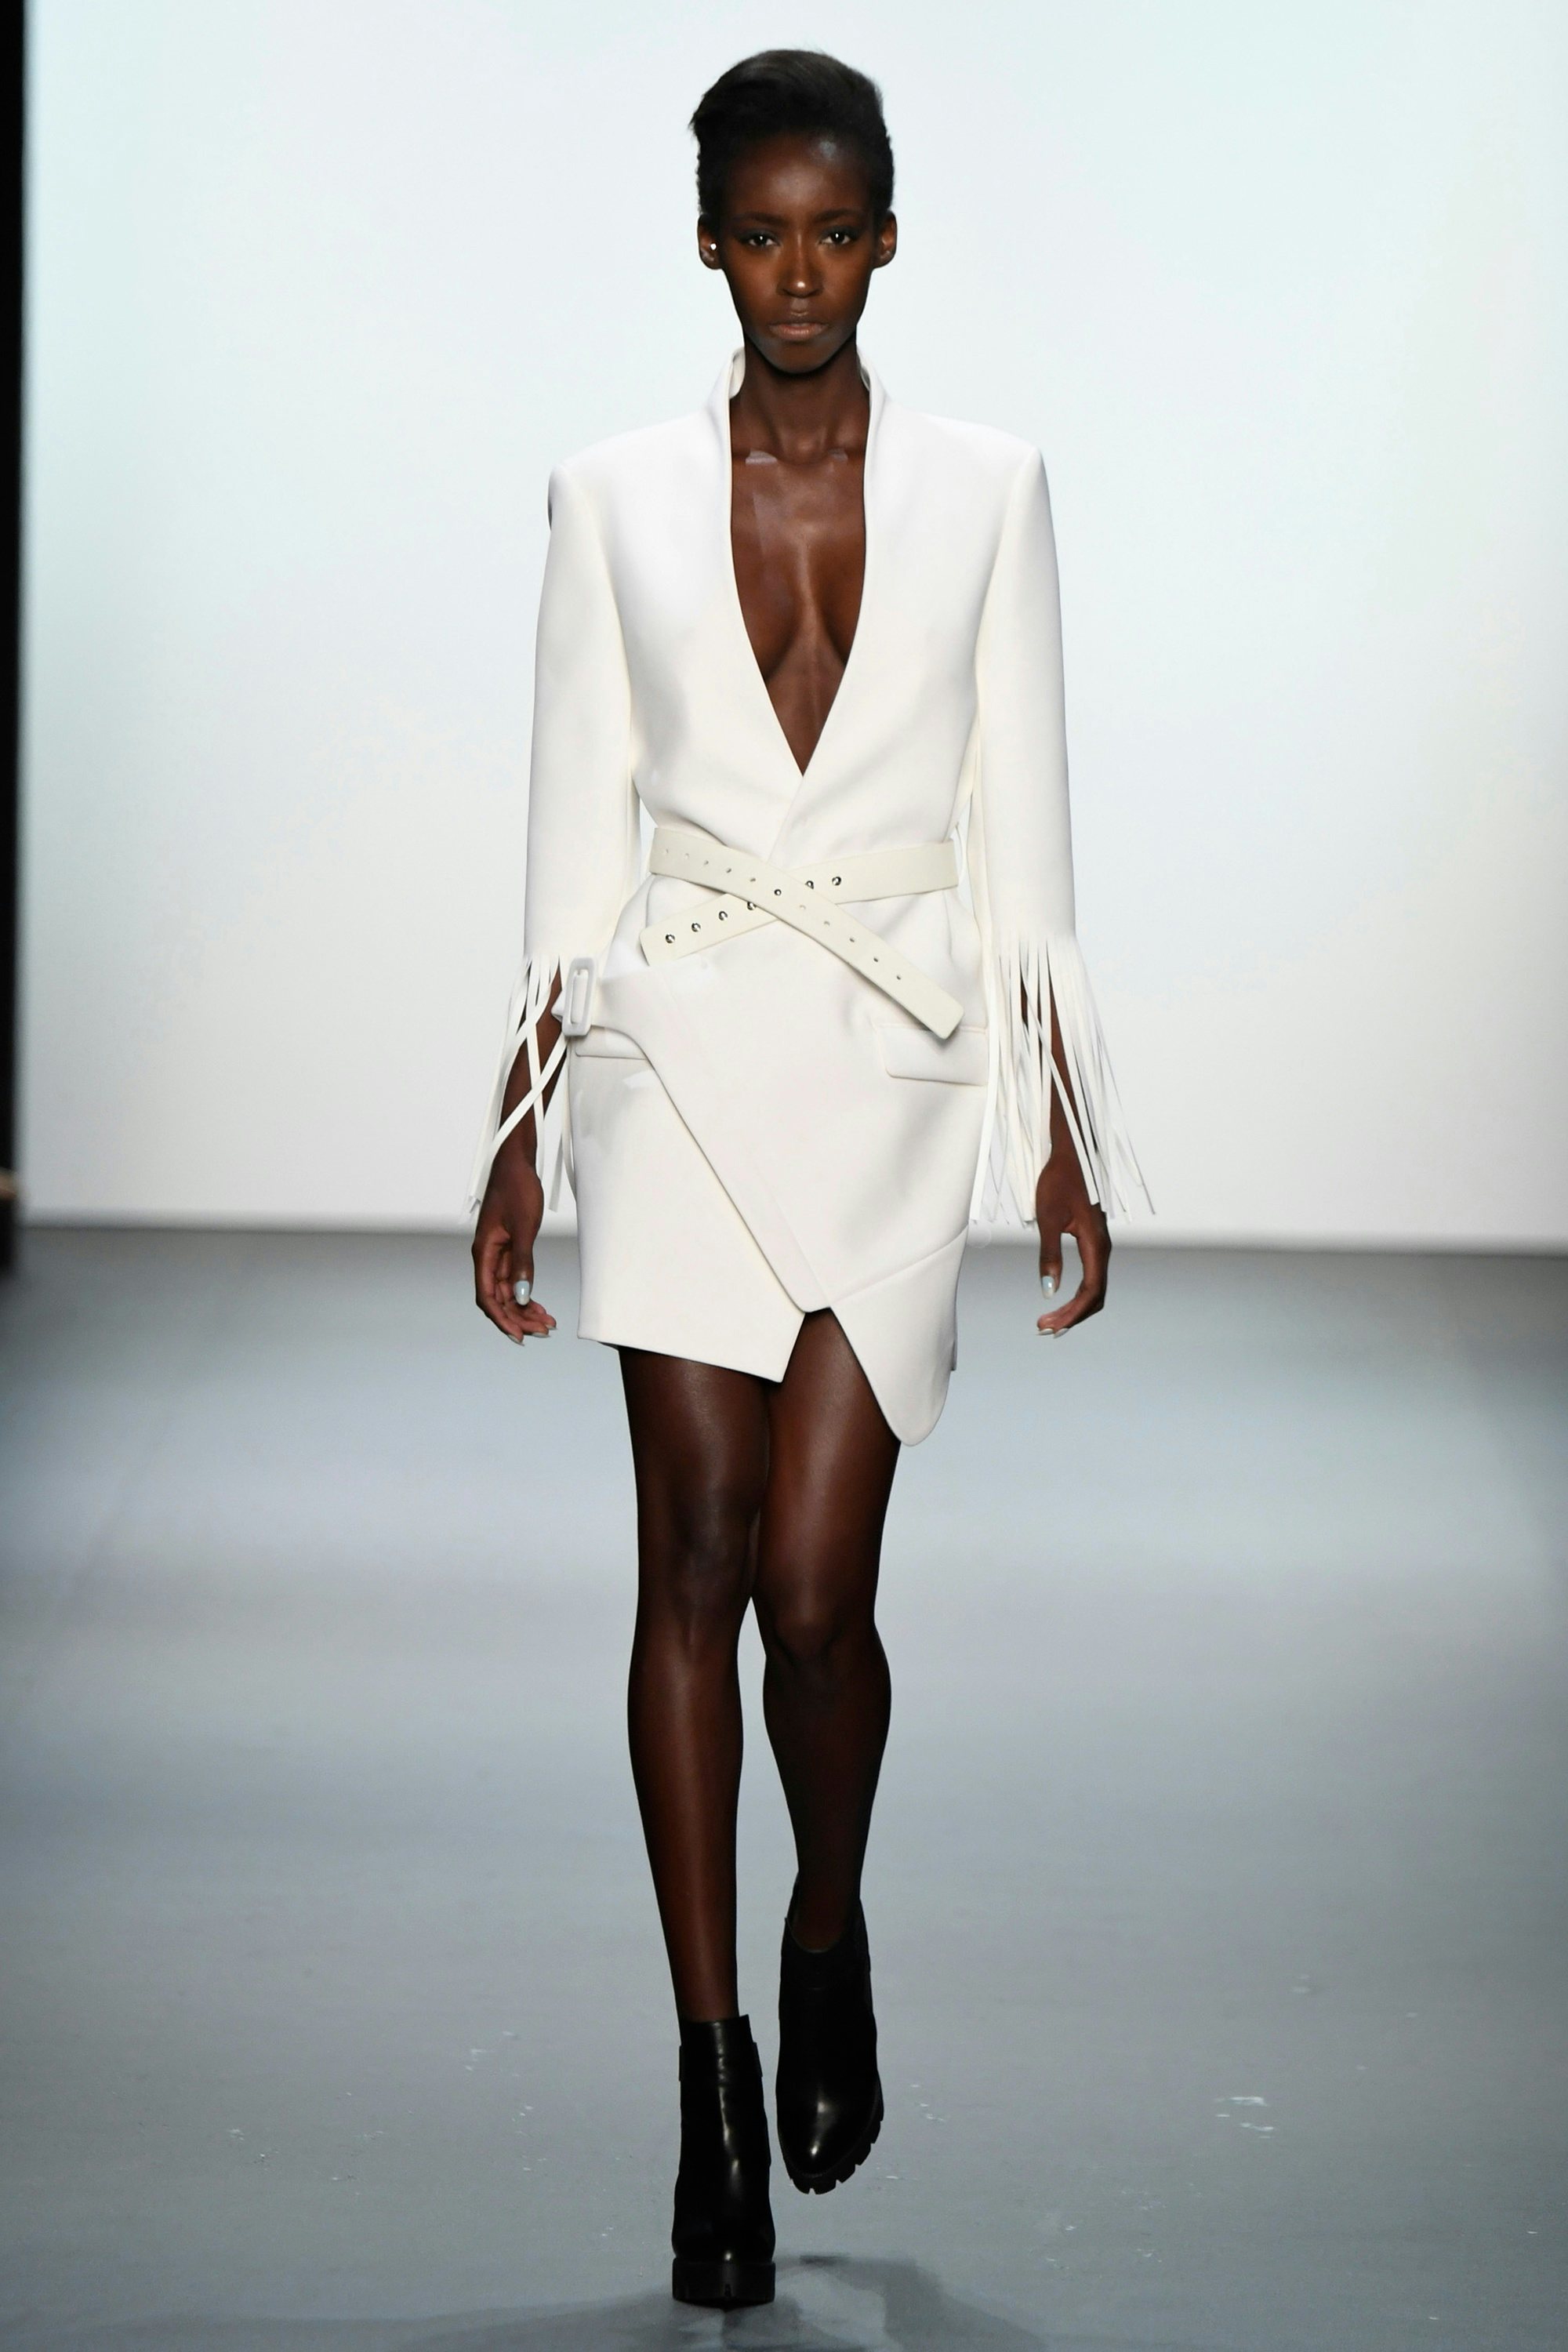 New York Fashion Week Grows as Magnet for Chinese Designers | Jing Daily